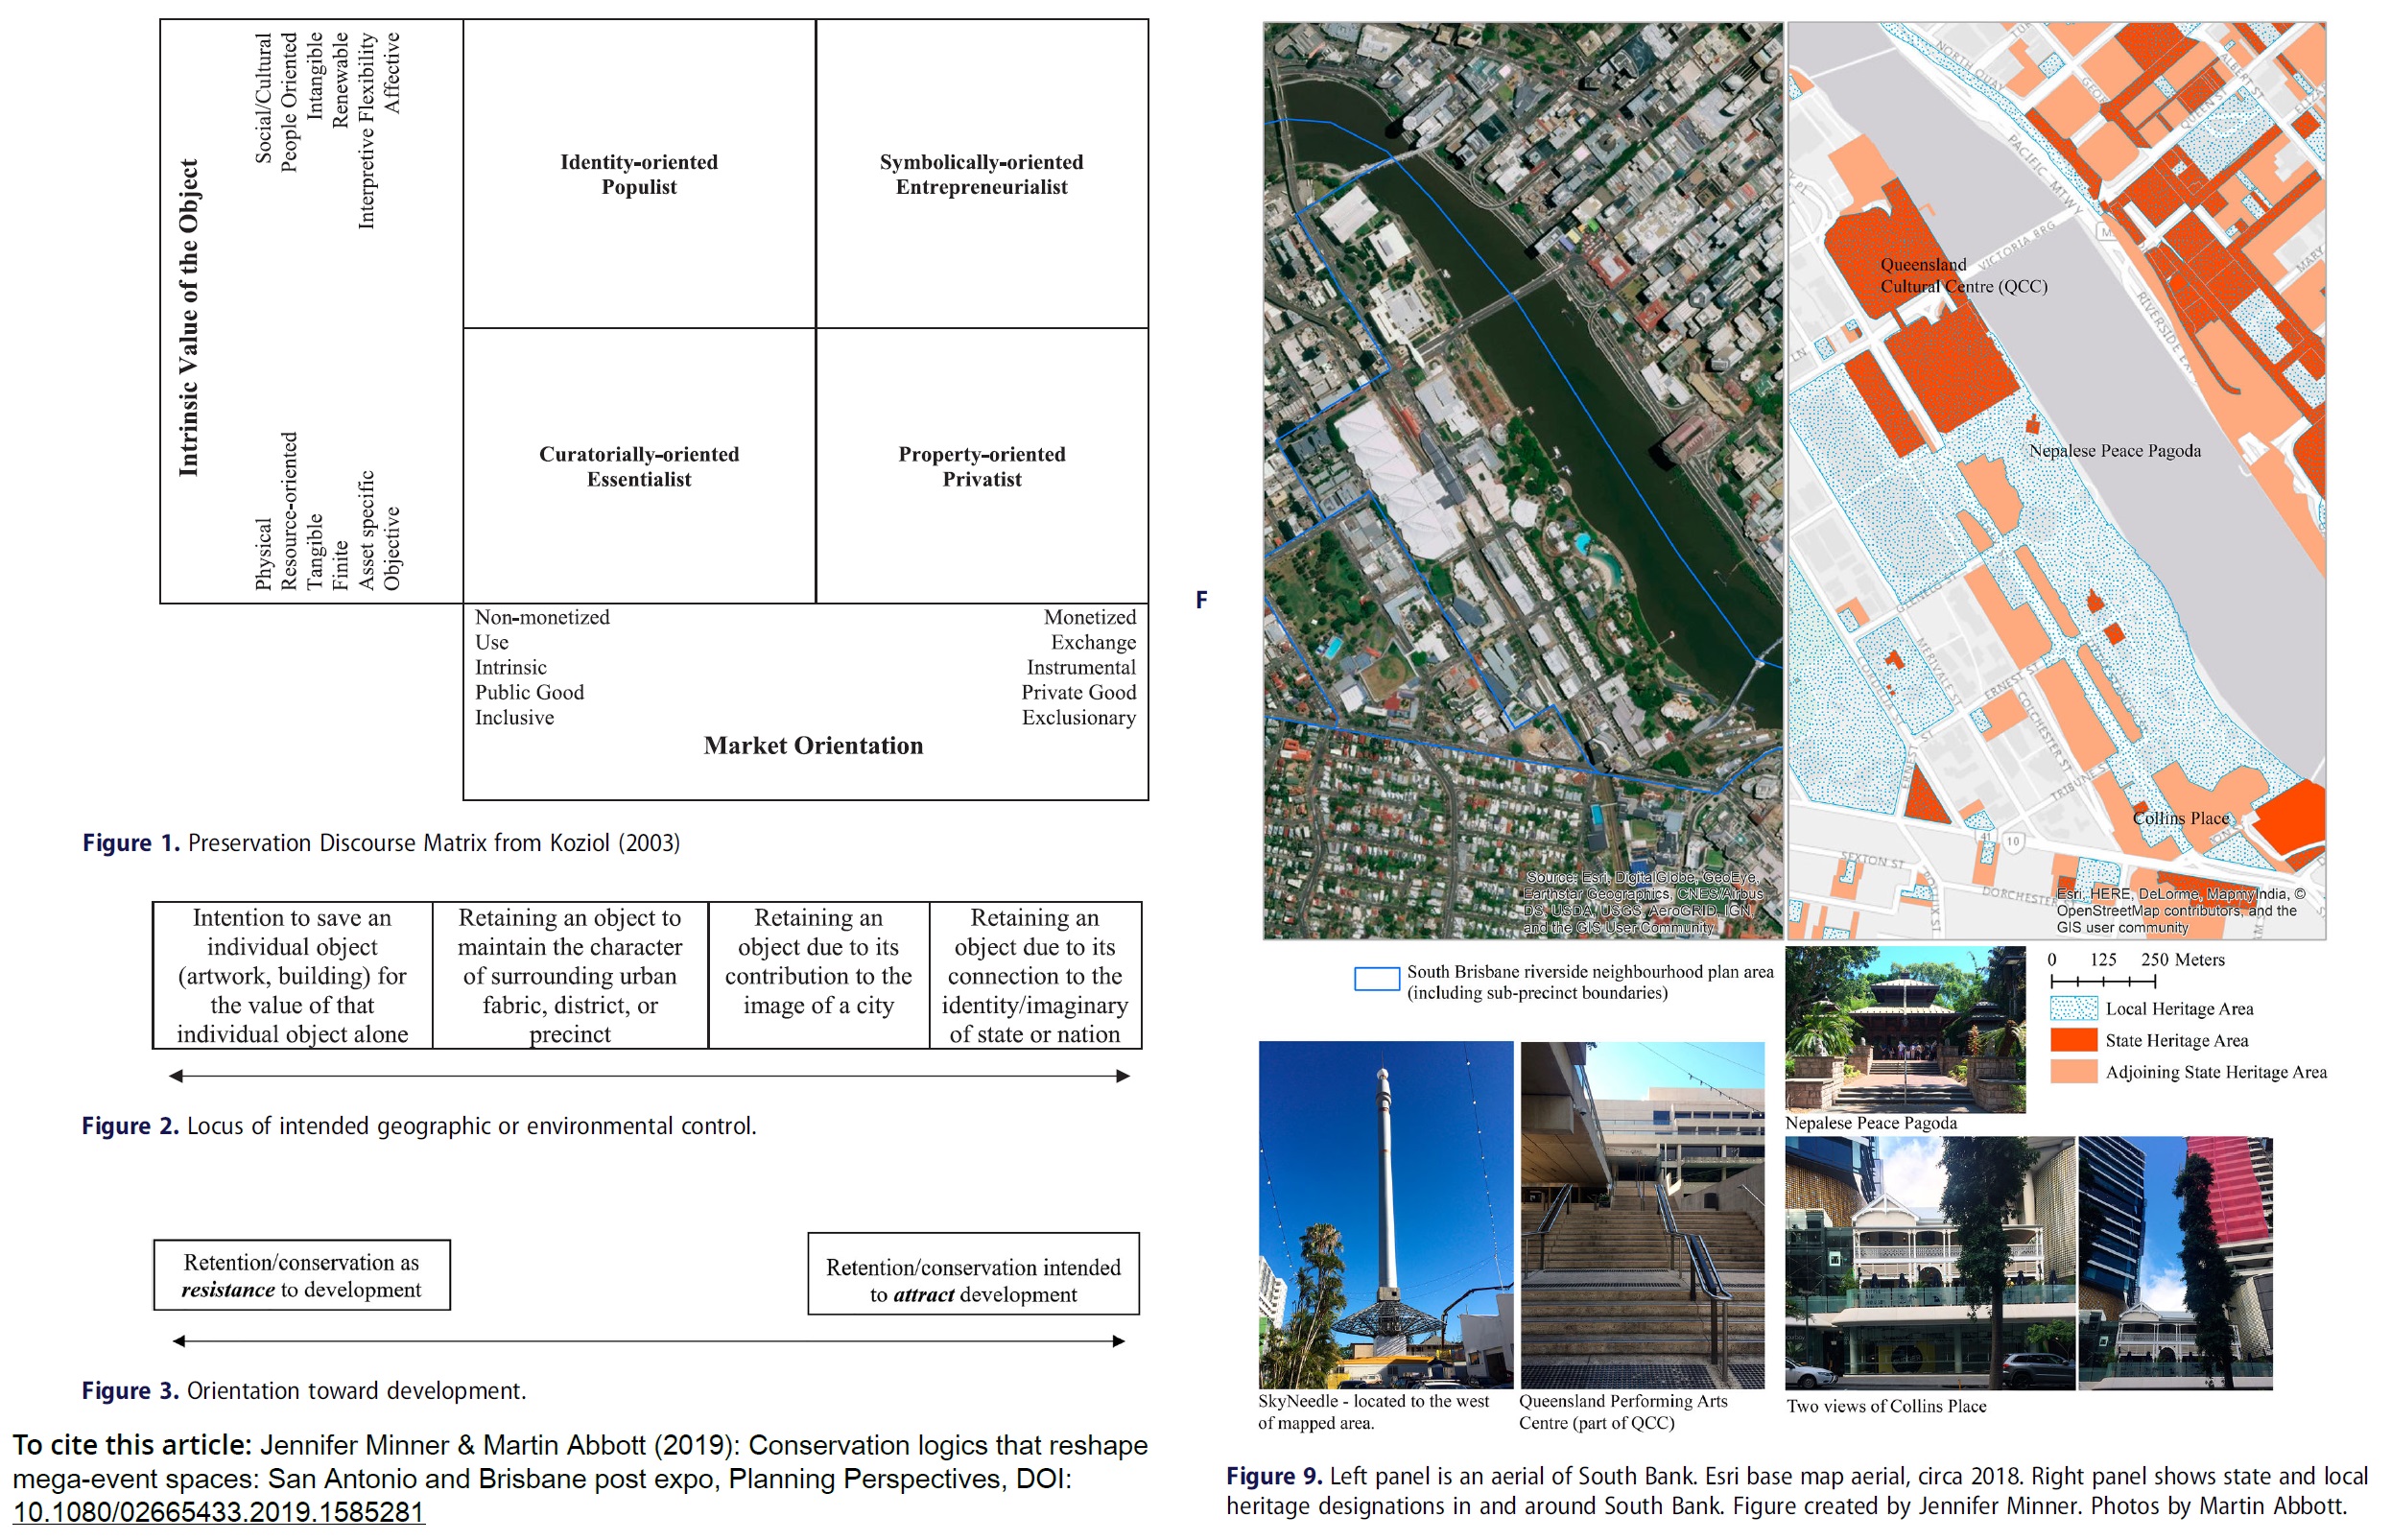 Diagram from a 2019 article about former mega-event sites in Brisbane, Queensland, Australia and San Antonio, TX, USA